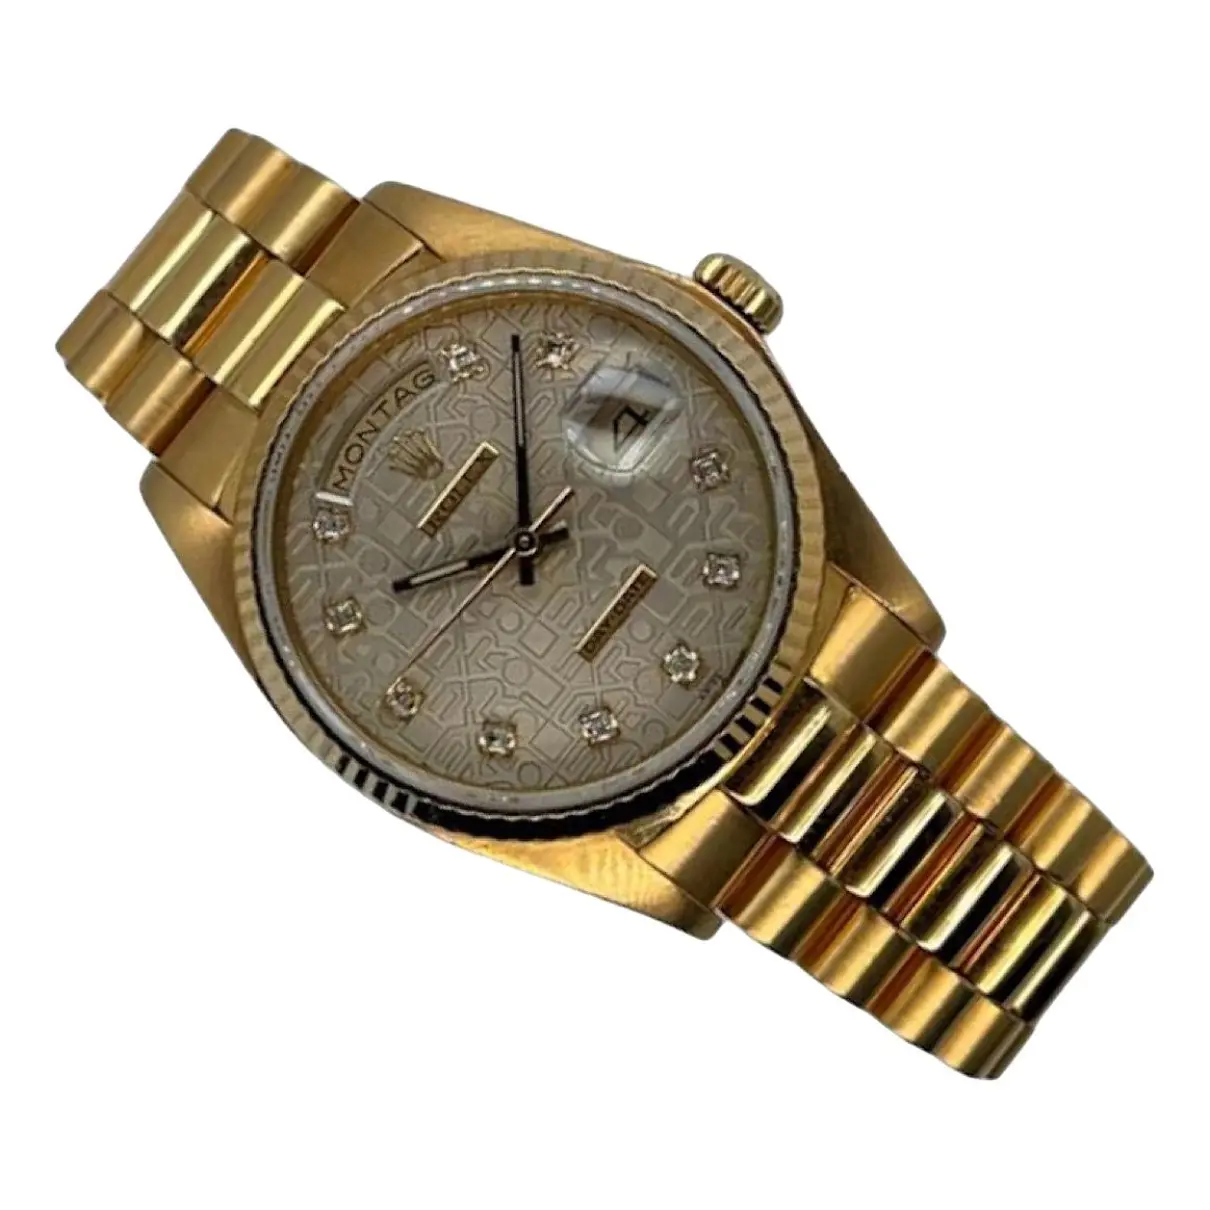 Day-Date yellow gold watch